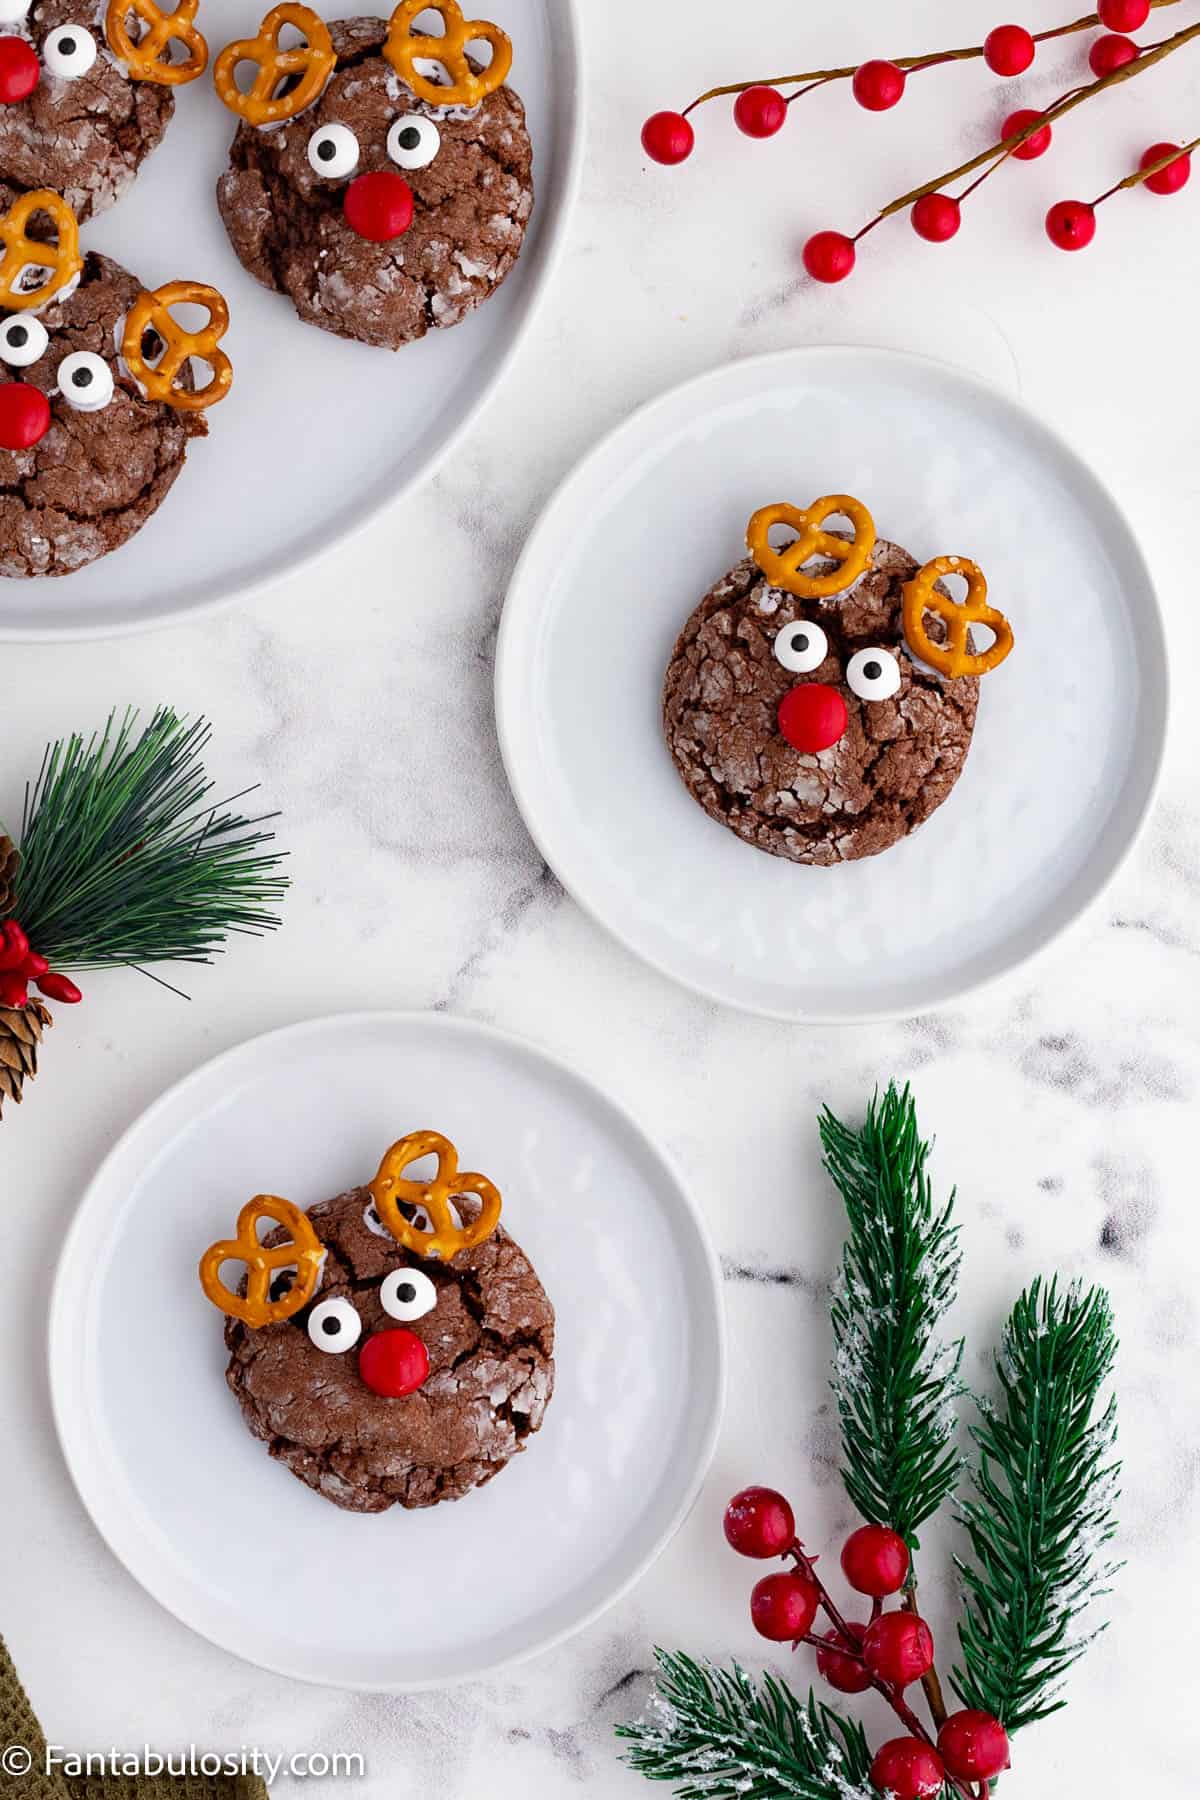 A birdseye photo of several round white plates holding round chocolate cookies that have been decorated to look like Rudolph the Red Nosed Reindeer